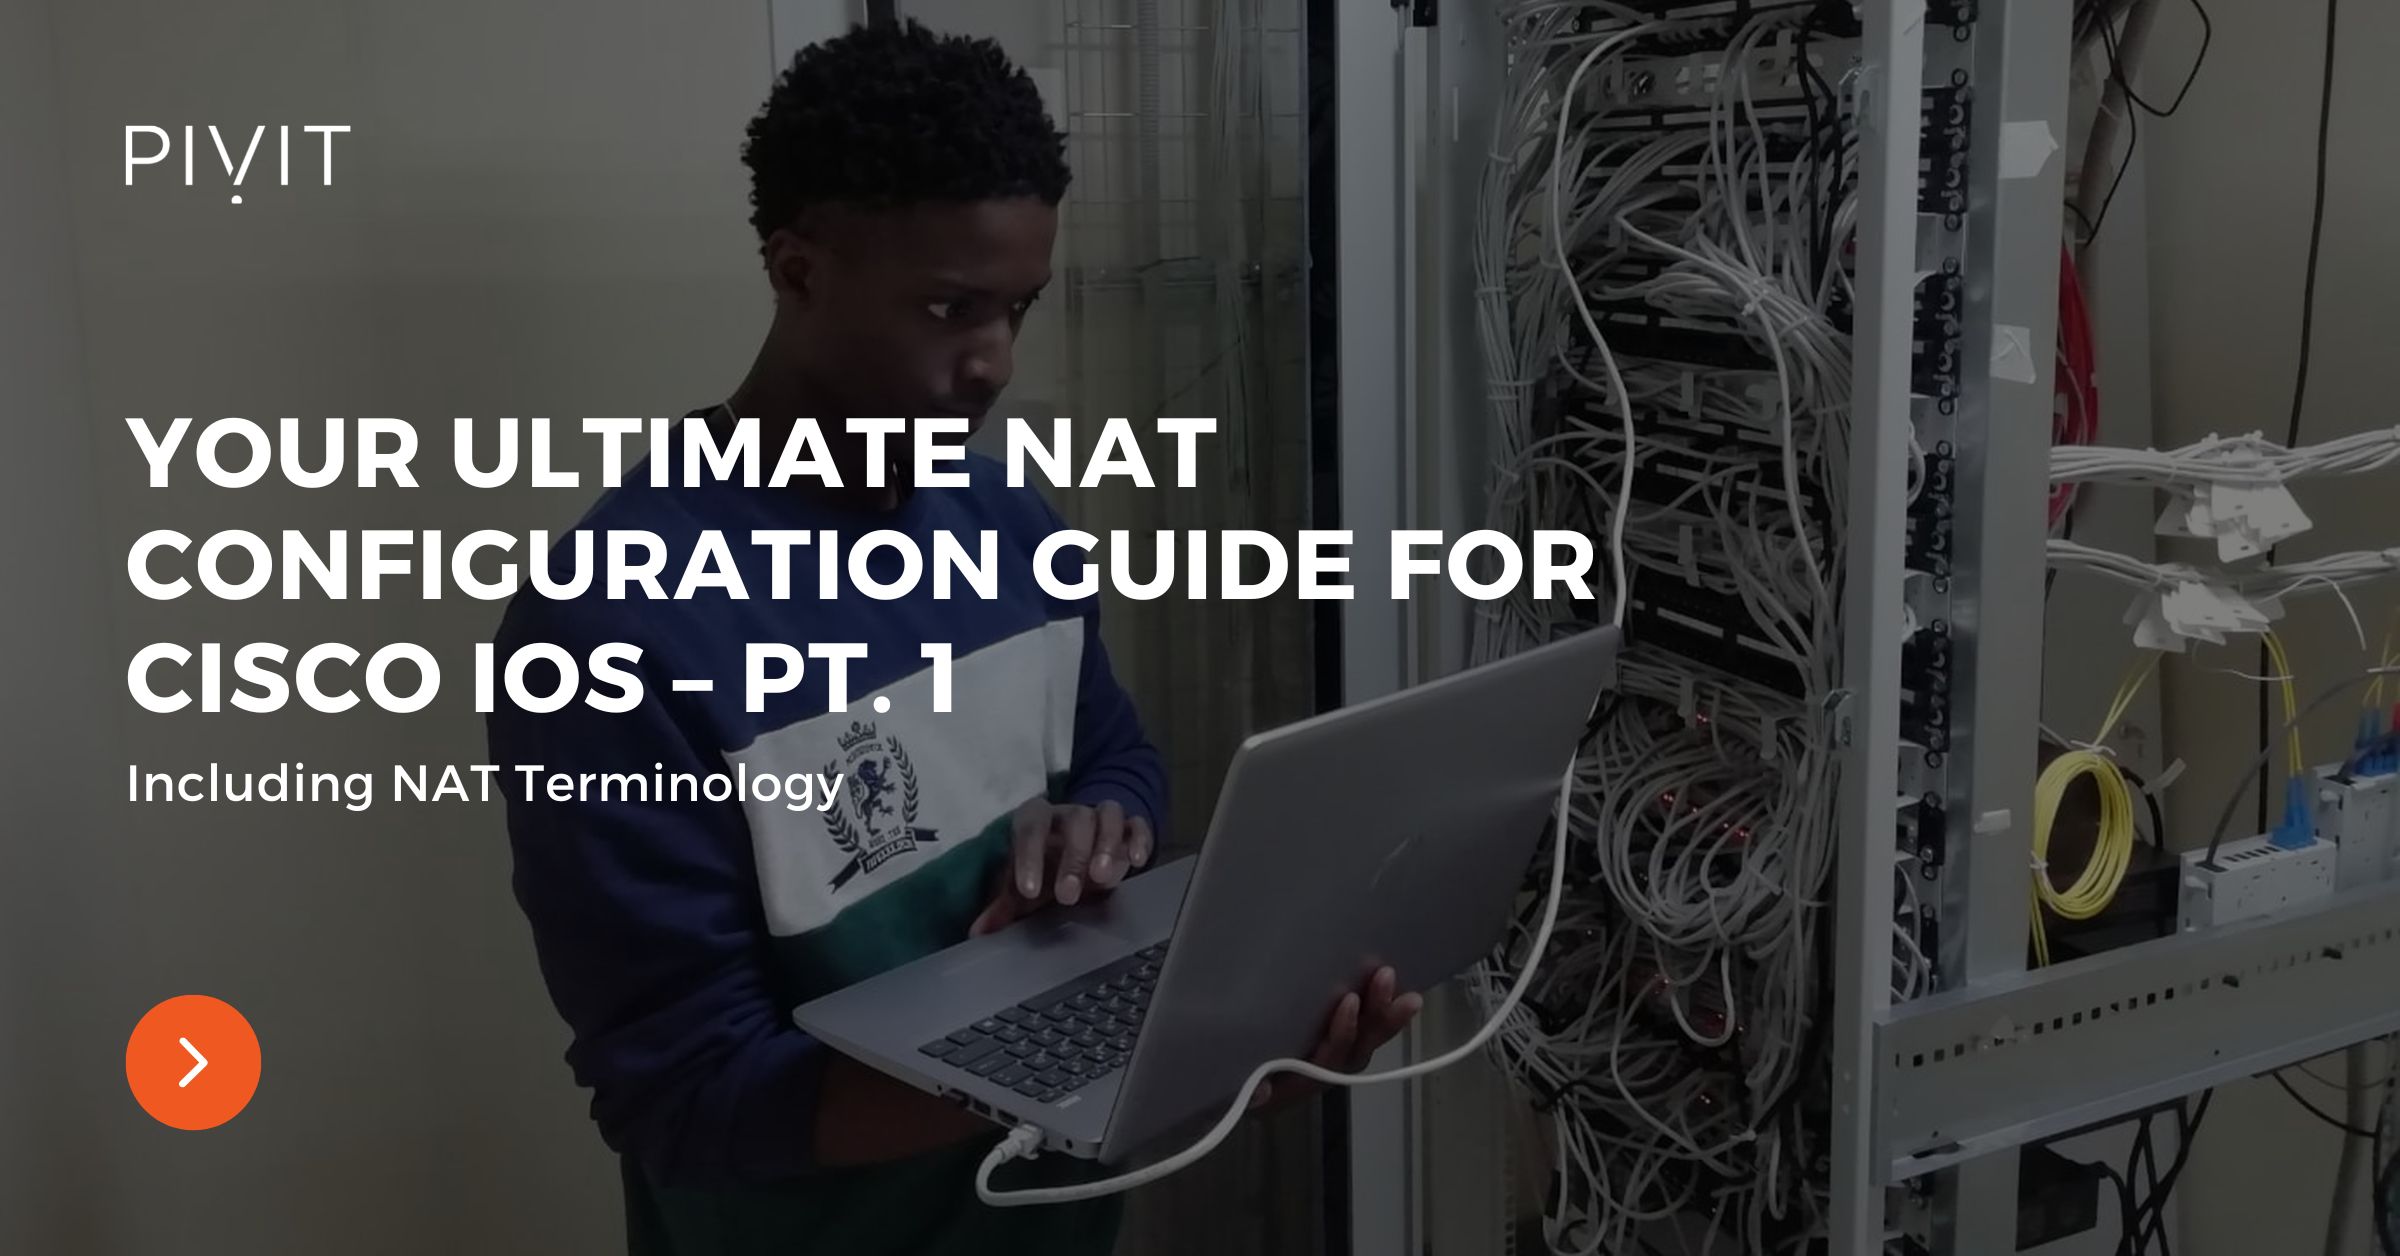 Your Ultimate NAT Configuration Guide for Cisco IOS – Pt. 1 - Including NAT Terminology